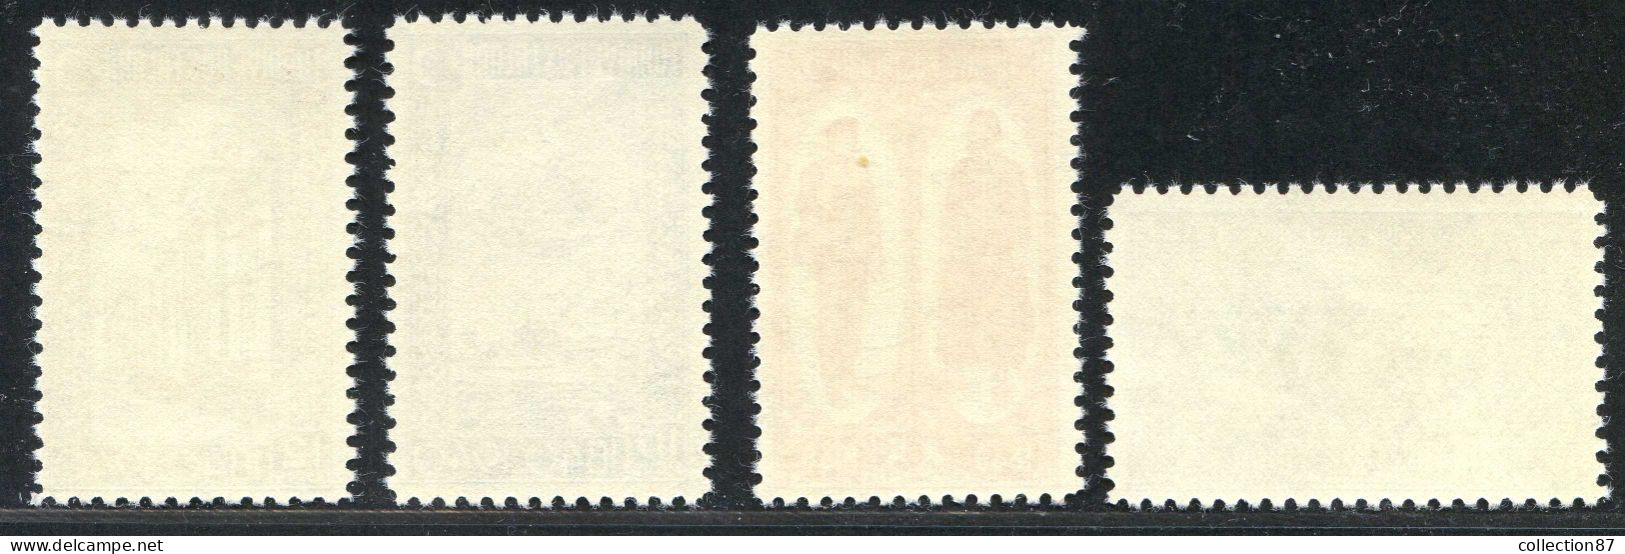 REF 091 > TURQUIE < Yv N° 947 à 950 * * < Neuf Luxe Dos Visible MNH * * - Turkey - Neufs